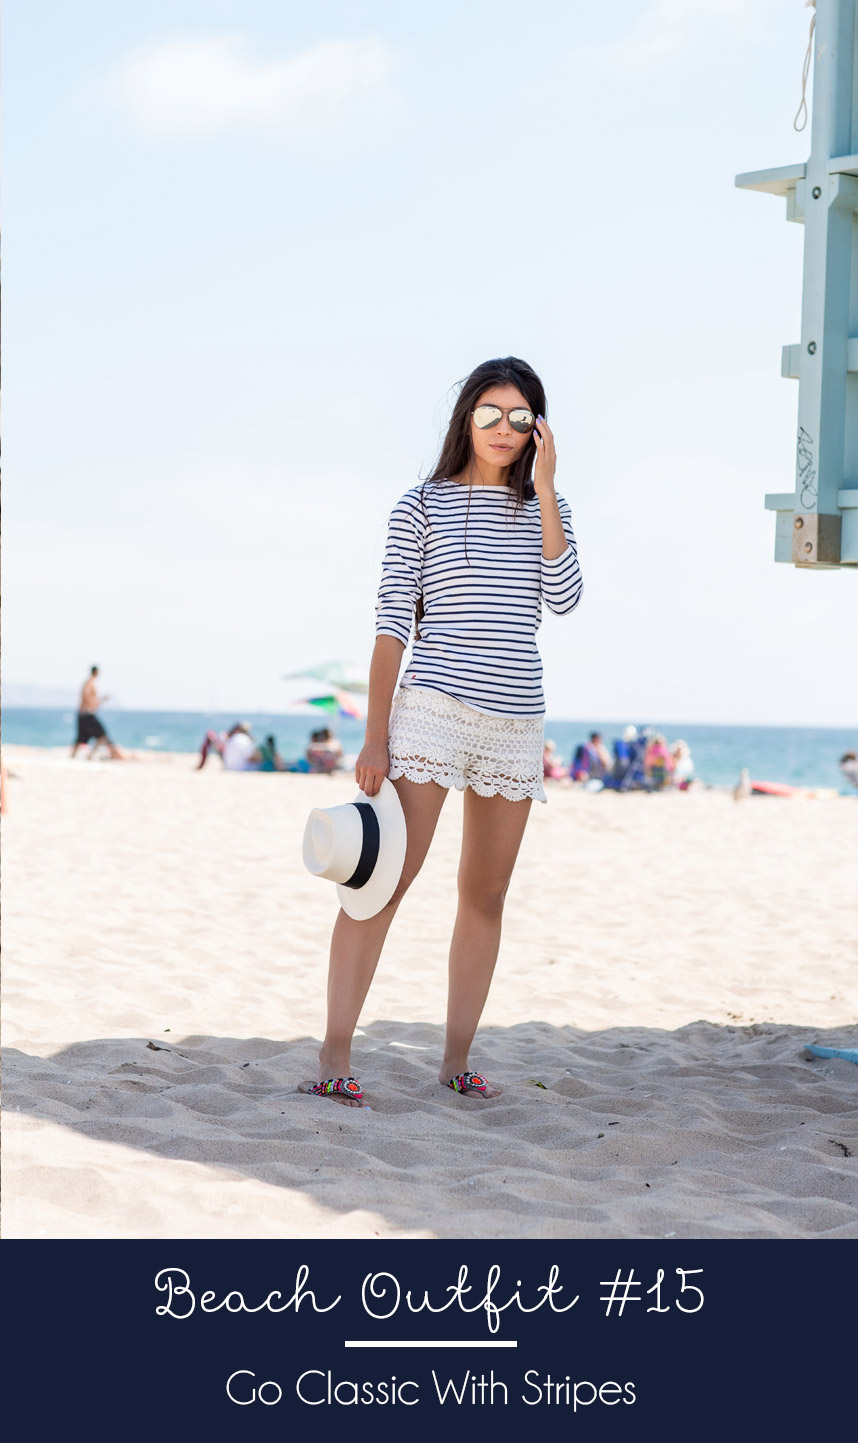 Stylish Beach Outfit - Visit Traveller Location to view the other 20 summer  outfits